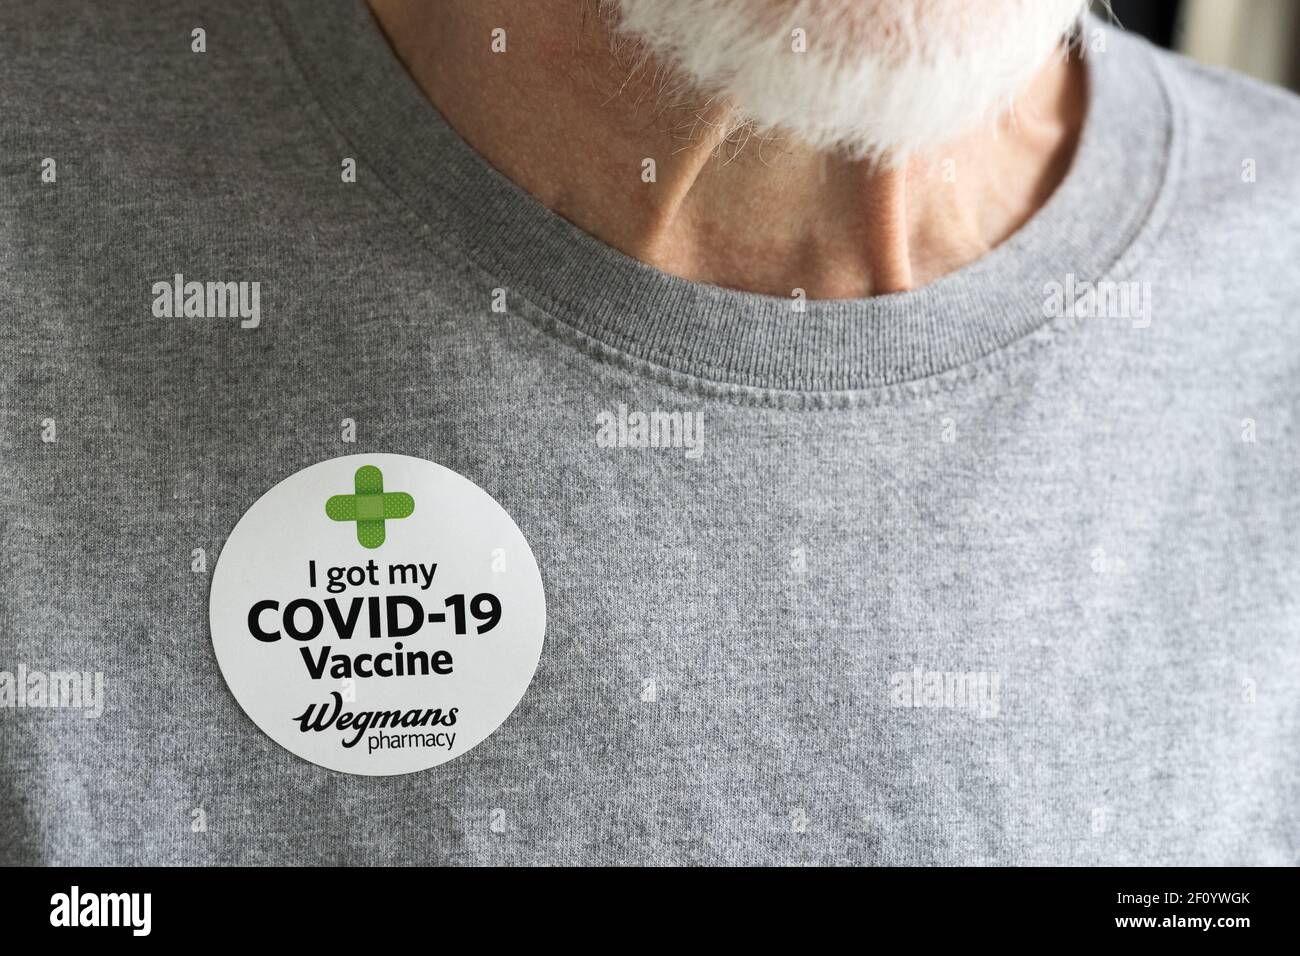 Flourtown, PA - Feb. 28, 2021: Sticker for the COVID-19 Vaccine received at Wegmans pharmacy. Stock Photo